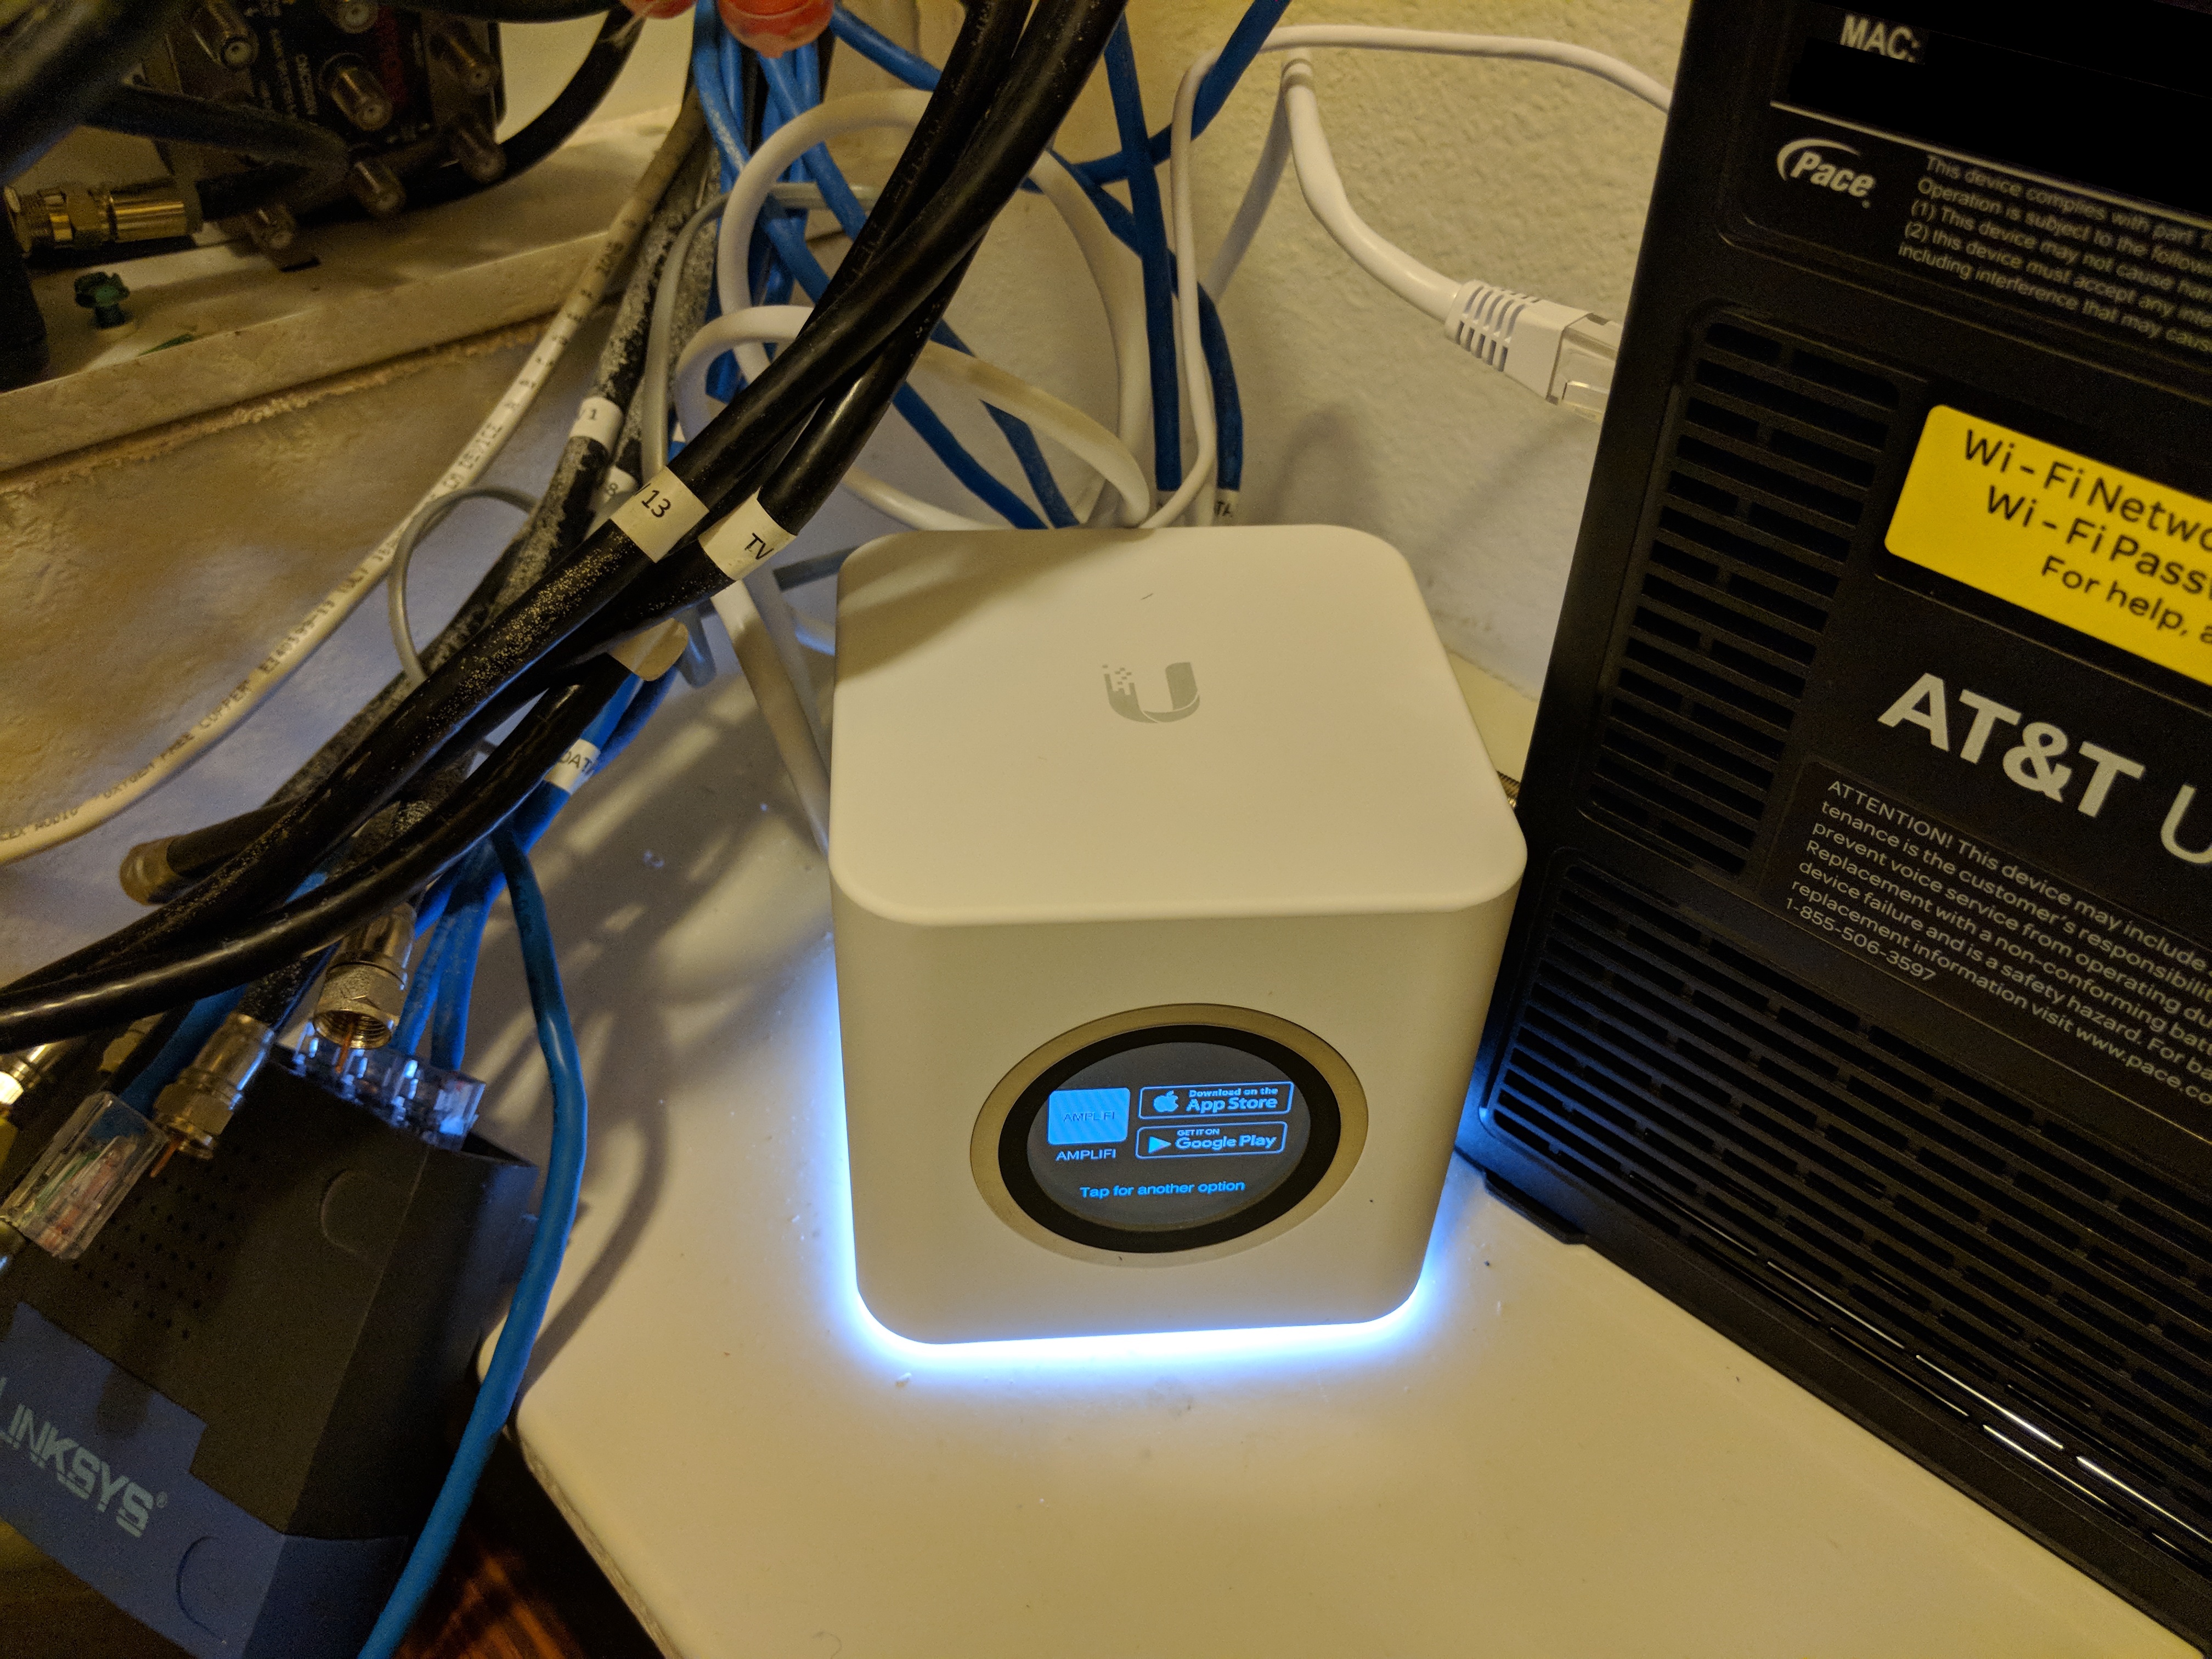 Booting up the AmpliFi HD